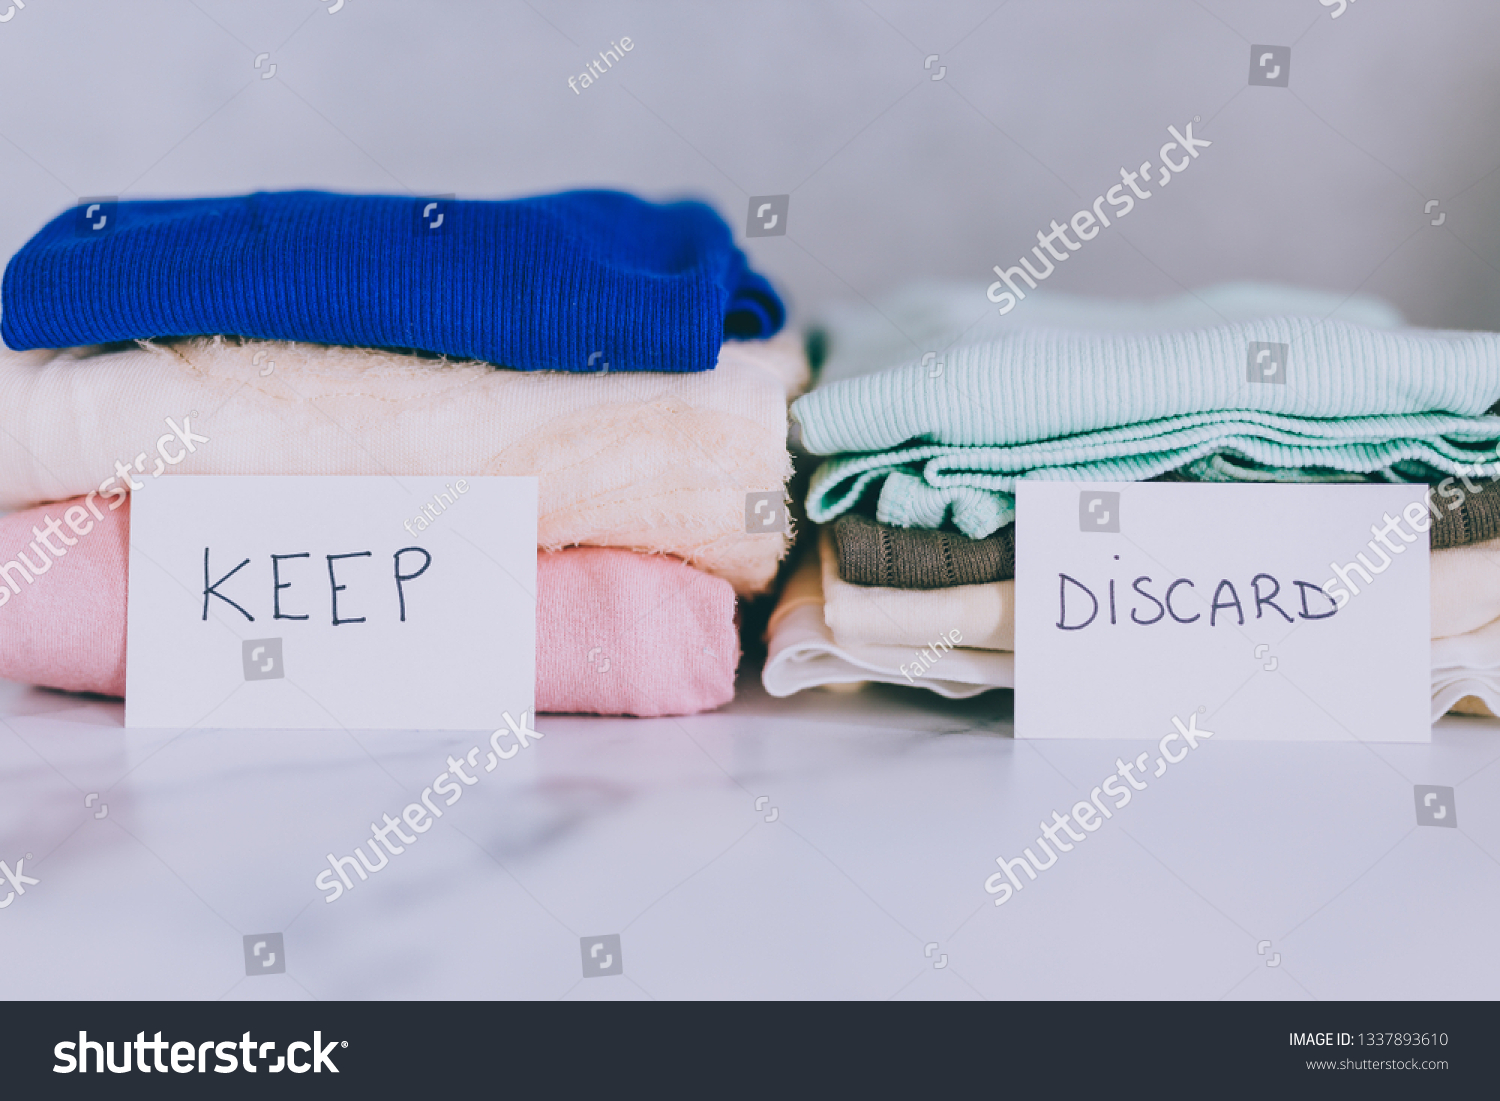 decluttering and tidying up concept: piles of tshirts and clothes being sorted into Keep Discard and Donate categories #1337893610